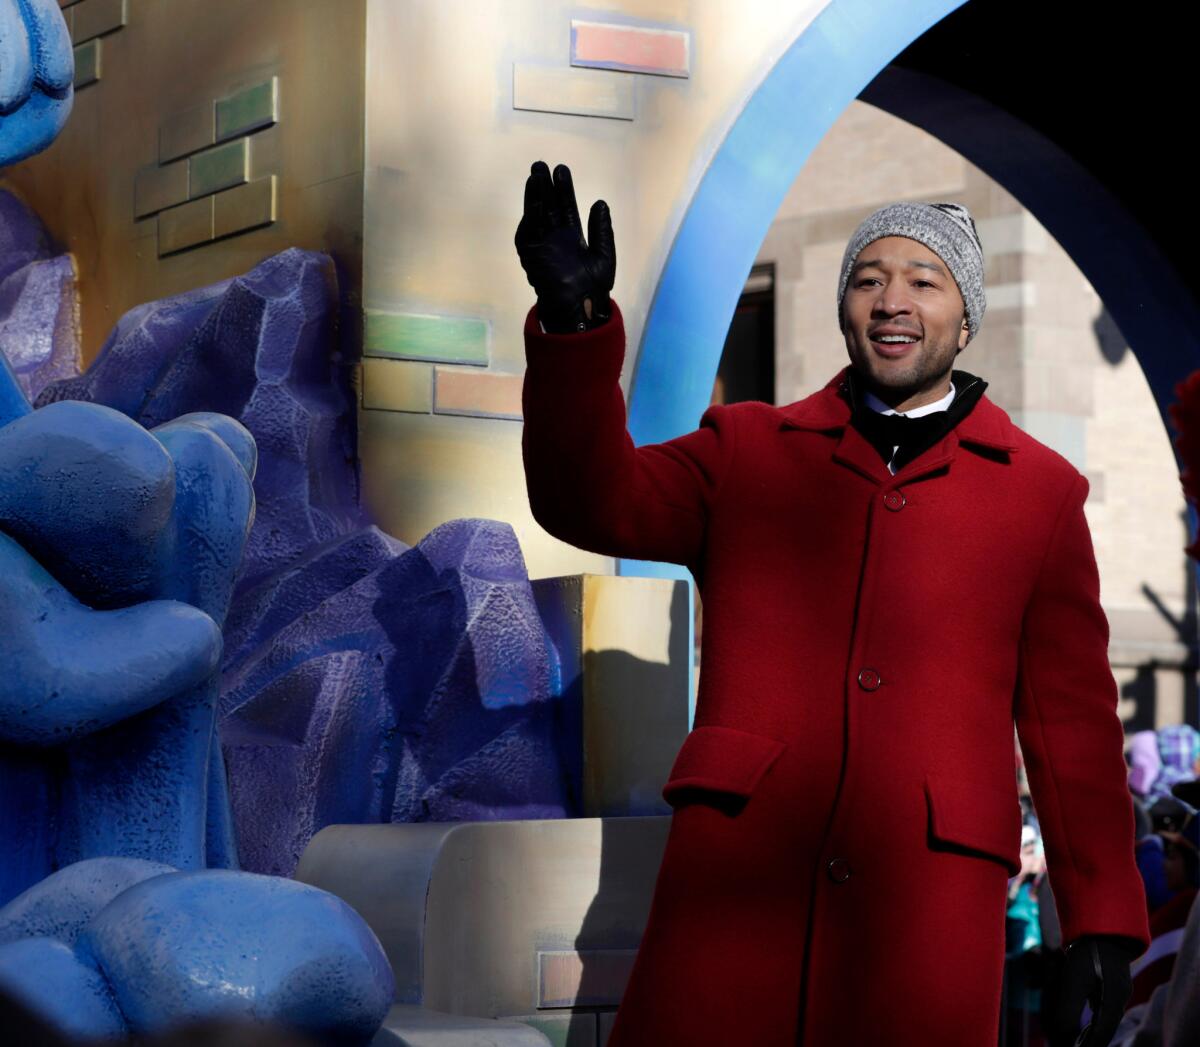 Singer John Legend waves from a float during the Macy's Thanksgiving Day Parade in New York.